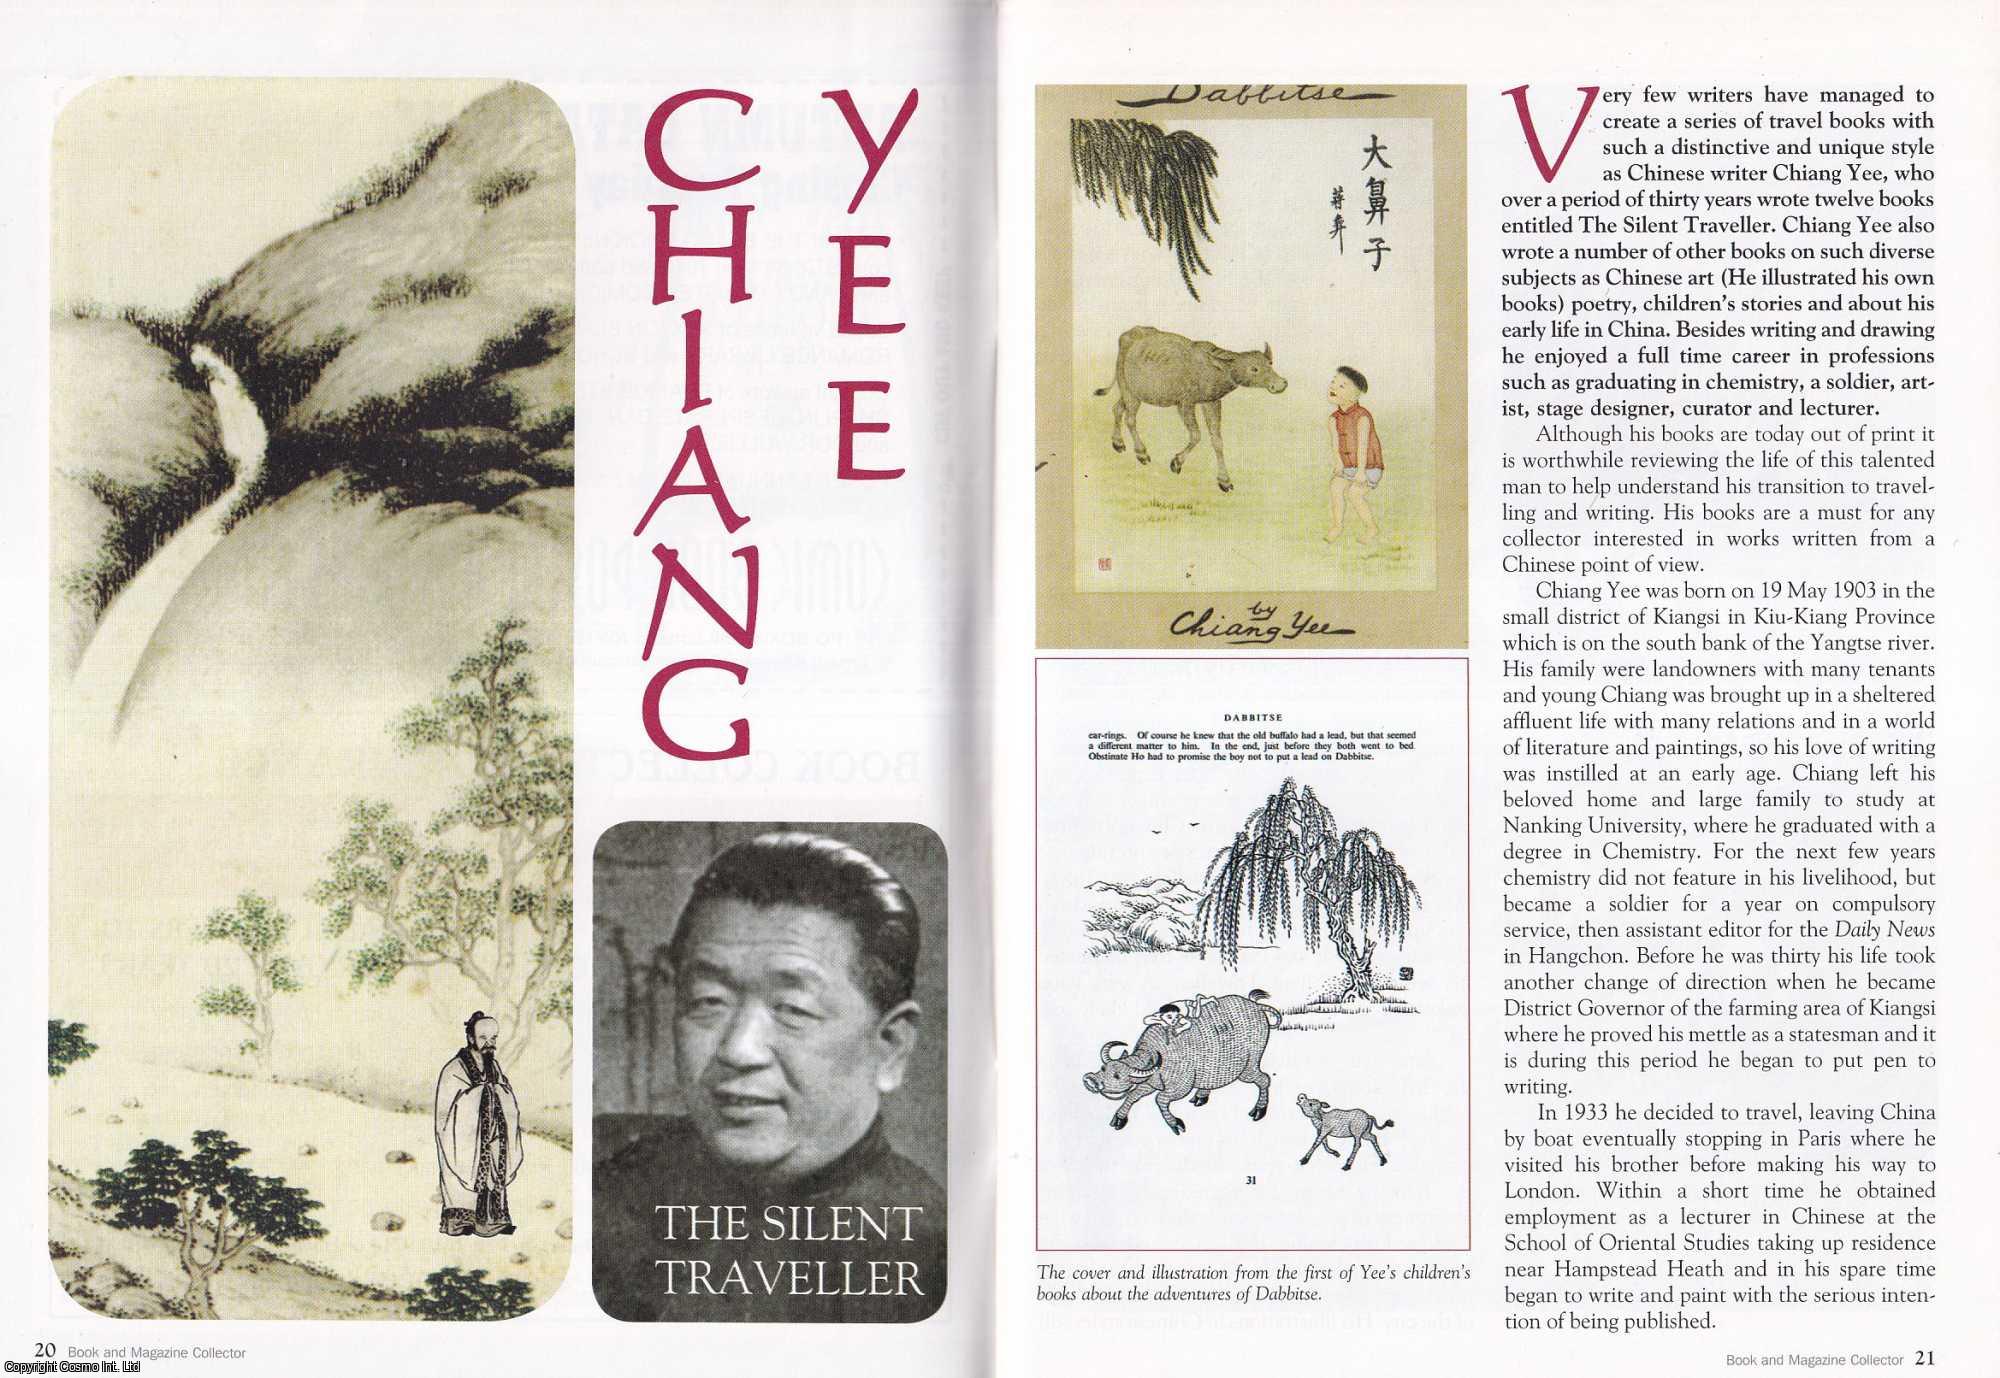 --- - Chiang Yee. The Silent Traveller. This is an original article separated from an issue of The Book & Magazine Collector publication.